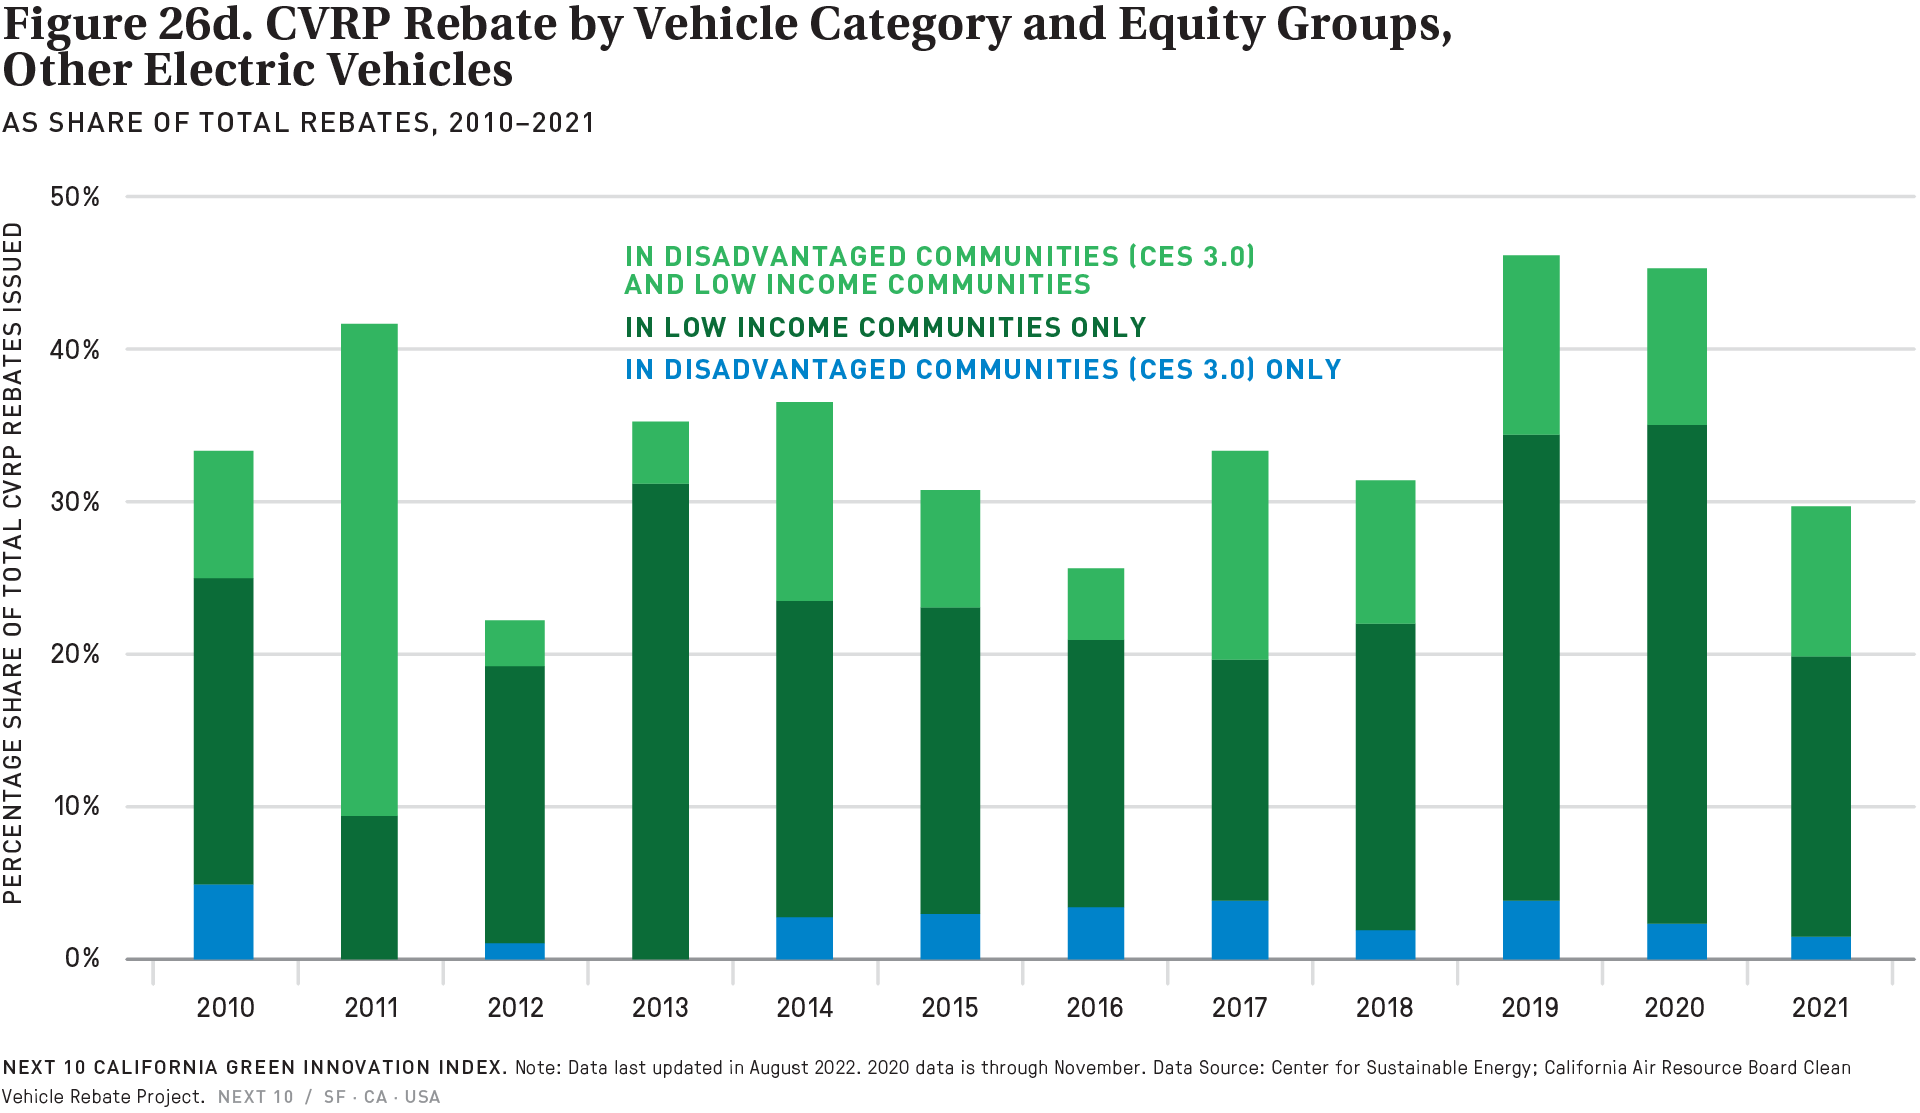 figure-26a-d-cvrp-rebate-by-vehicle-category-and-equity-groups-as